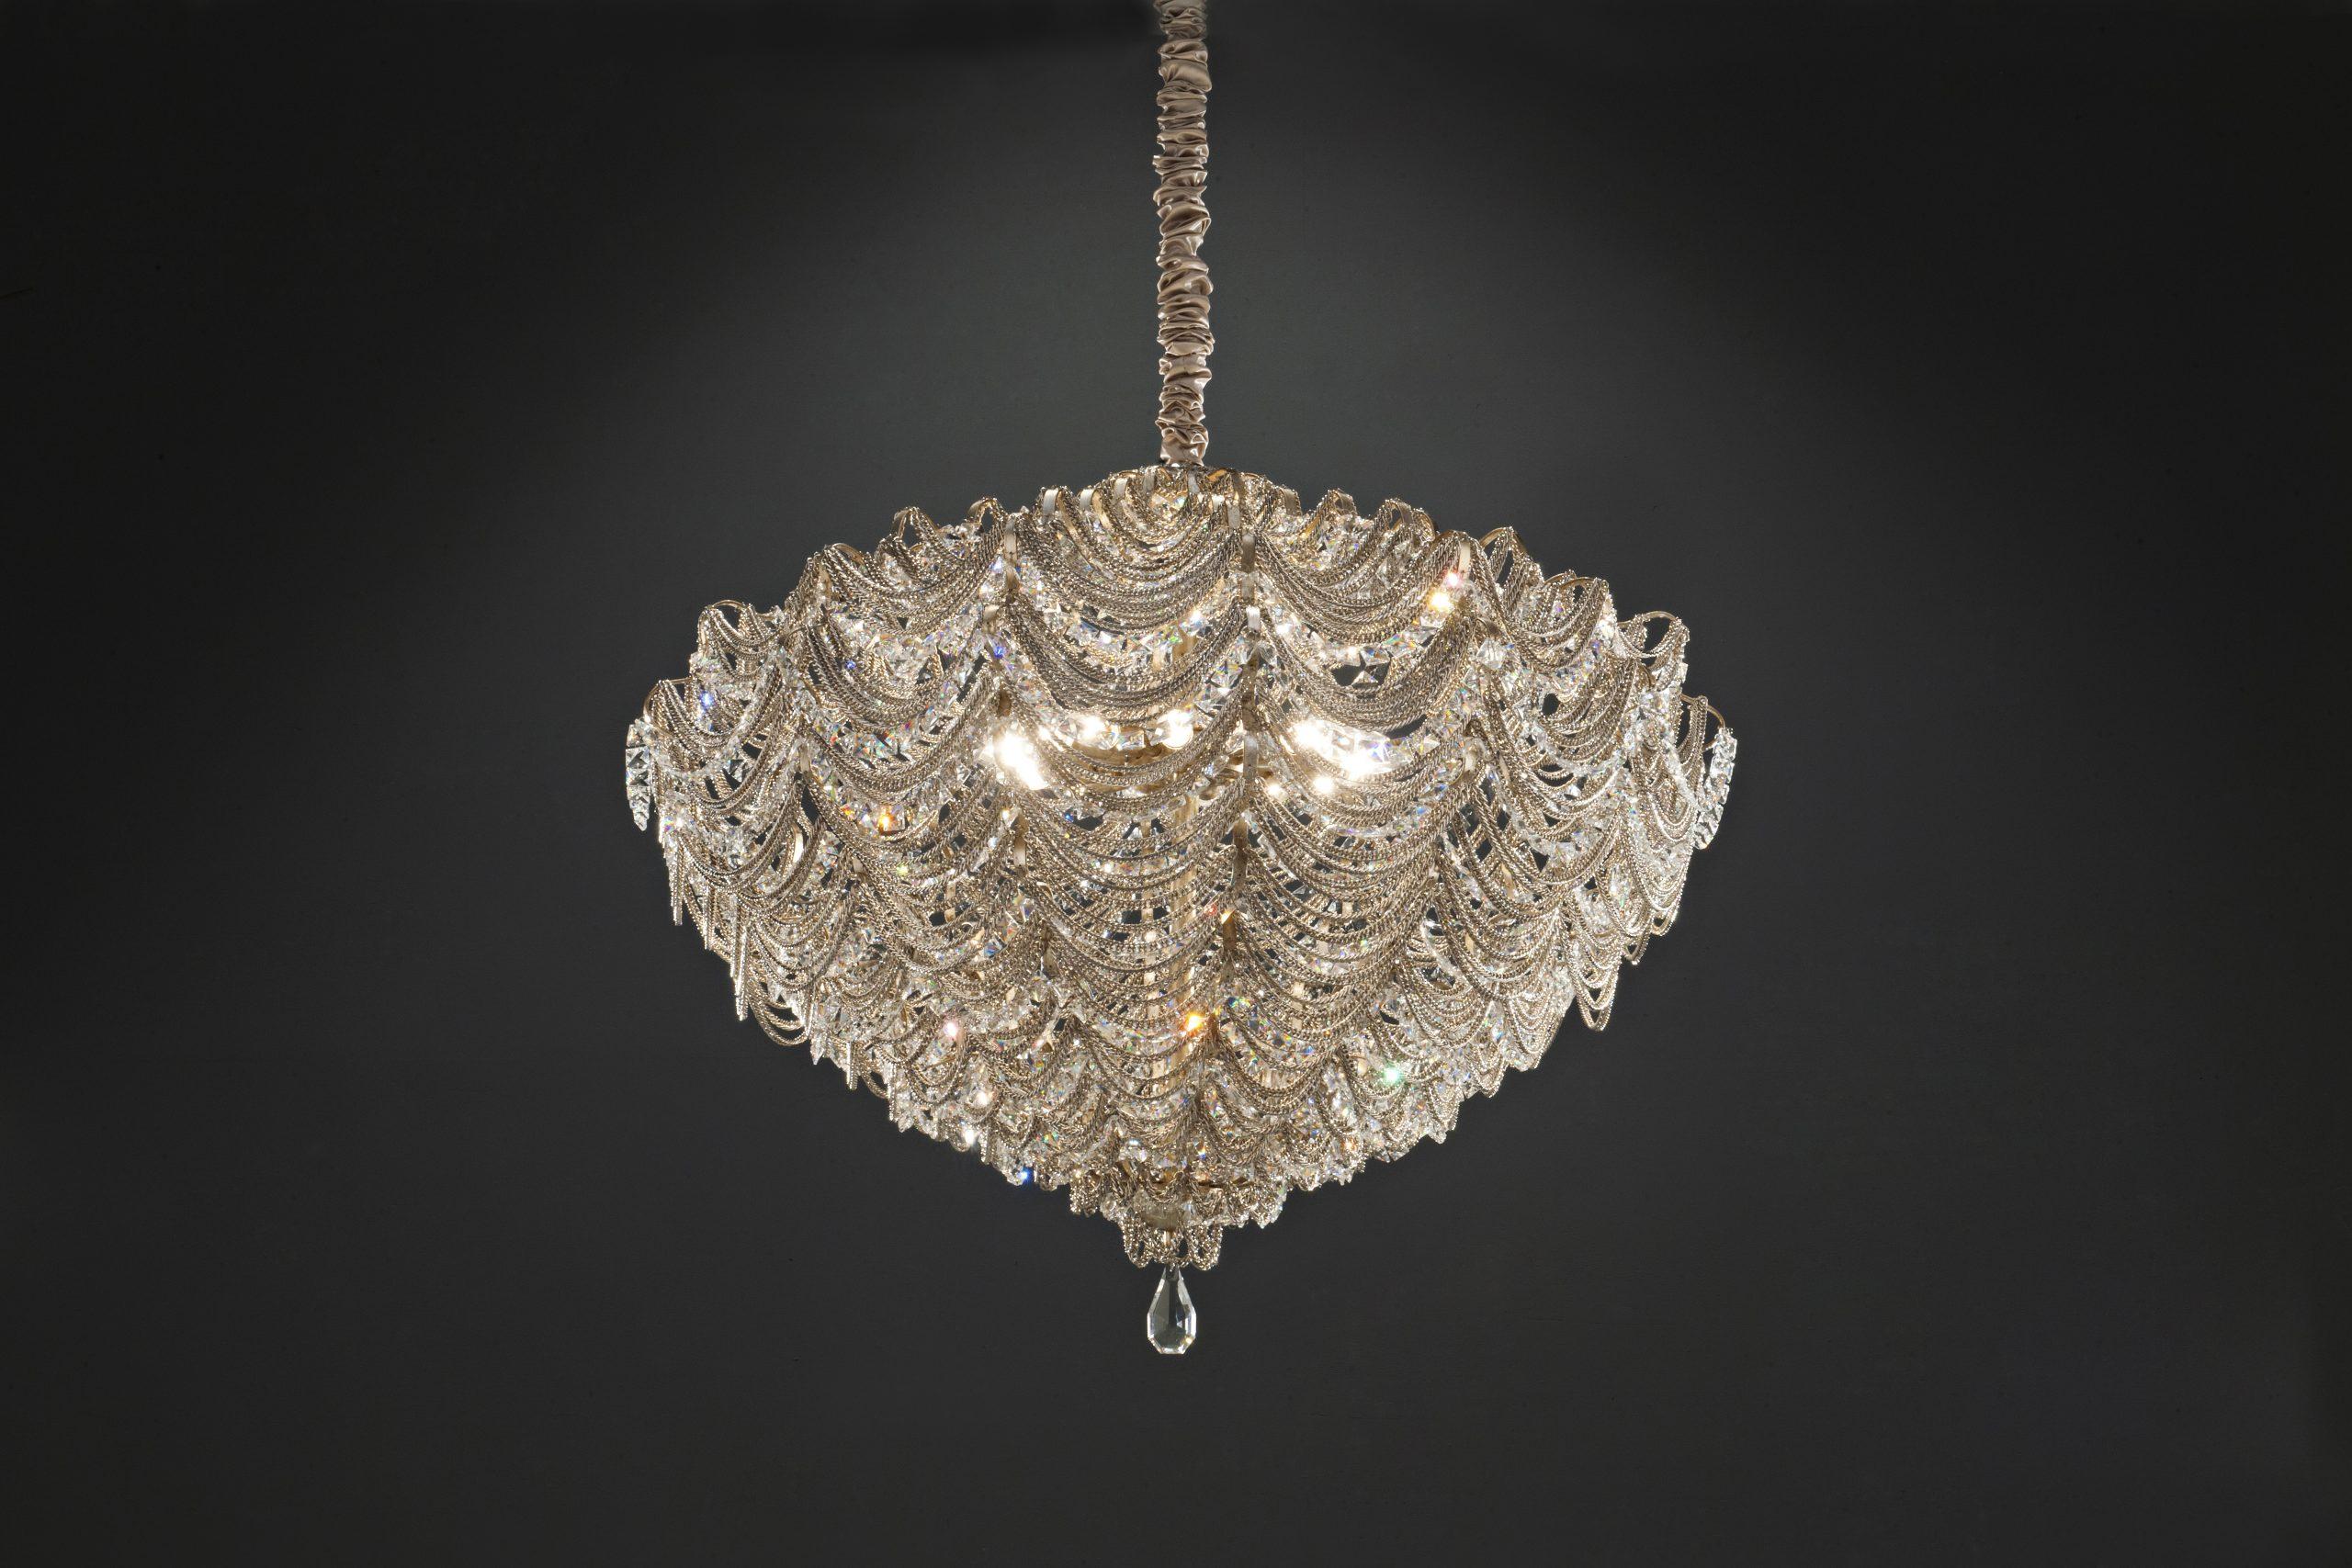 Crystal chandelier lamp 110 by Aver
Dimensions: D 110 x H 85 cm 
Materials: Natural clear crystals, nickel.
Lighting: 16 x E14
Available in other sizes.

All our lamps can be wired according to each country. If sold to the USA it will be wired